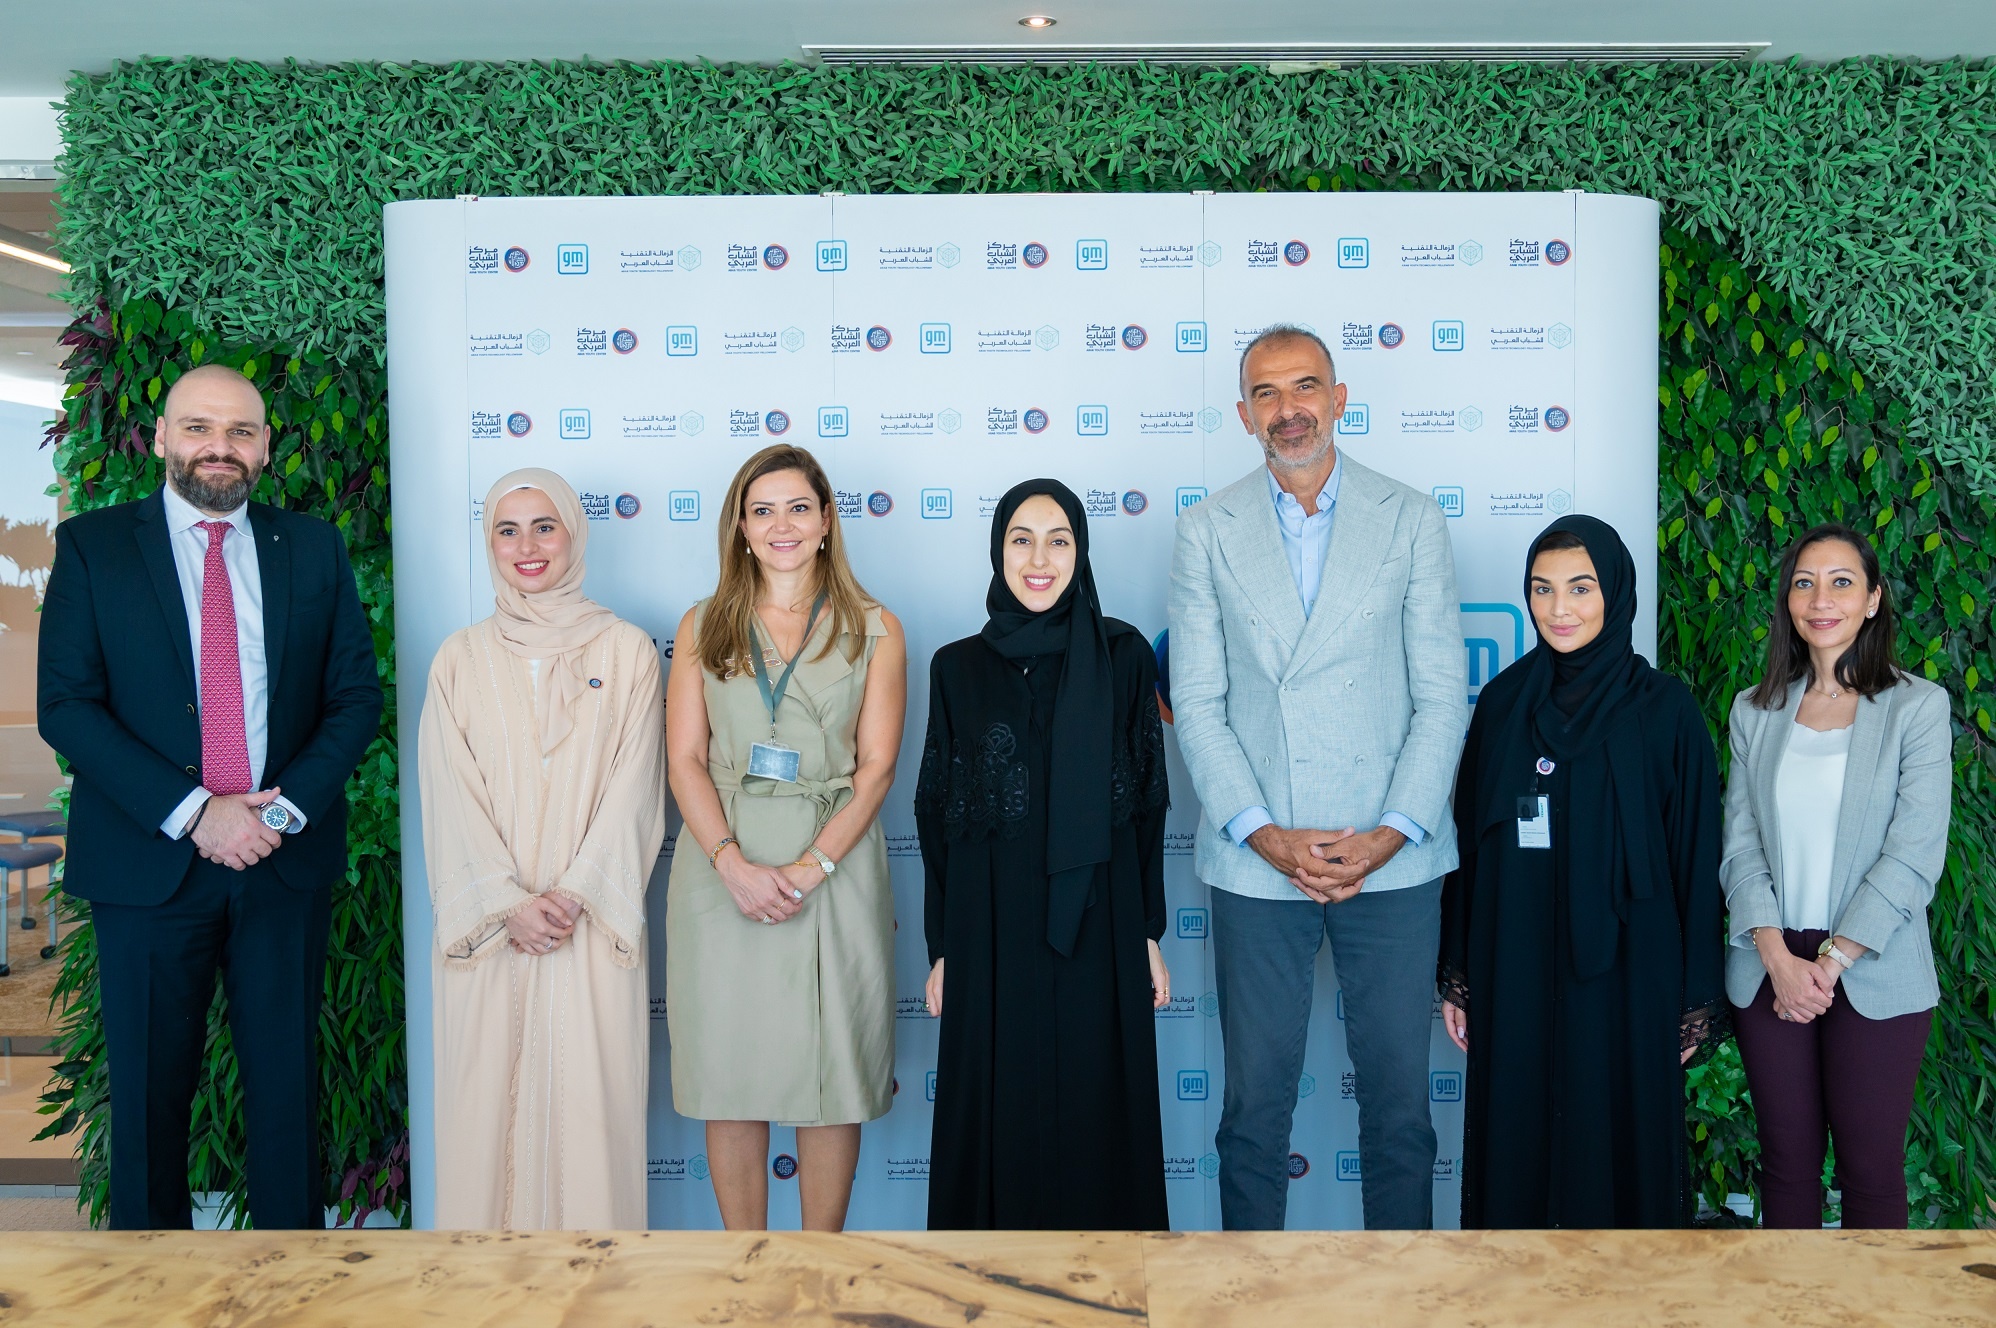 General Motors and Arab Youth Center collaborate to Build an Equitable STEM Pipeline amongst the Next Generation